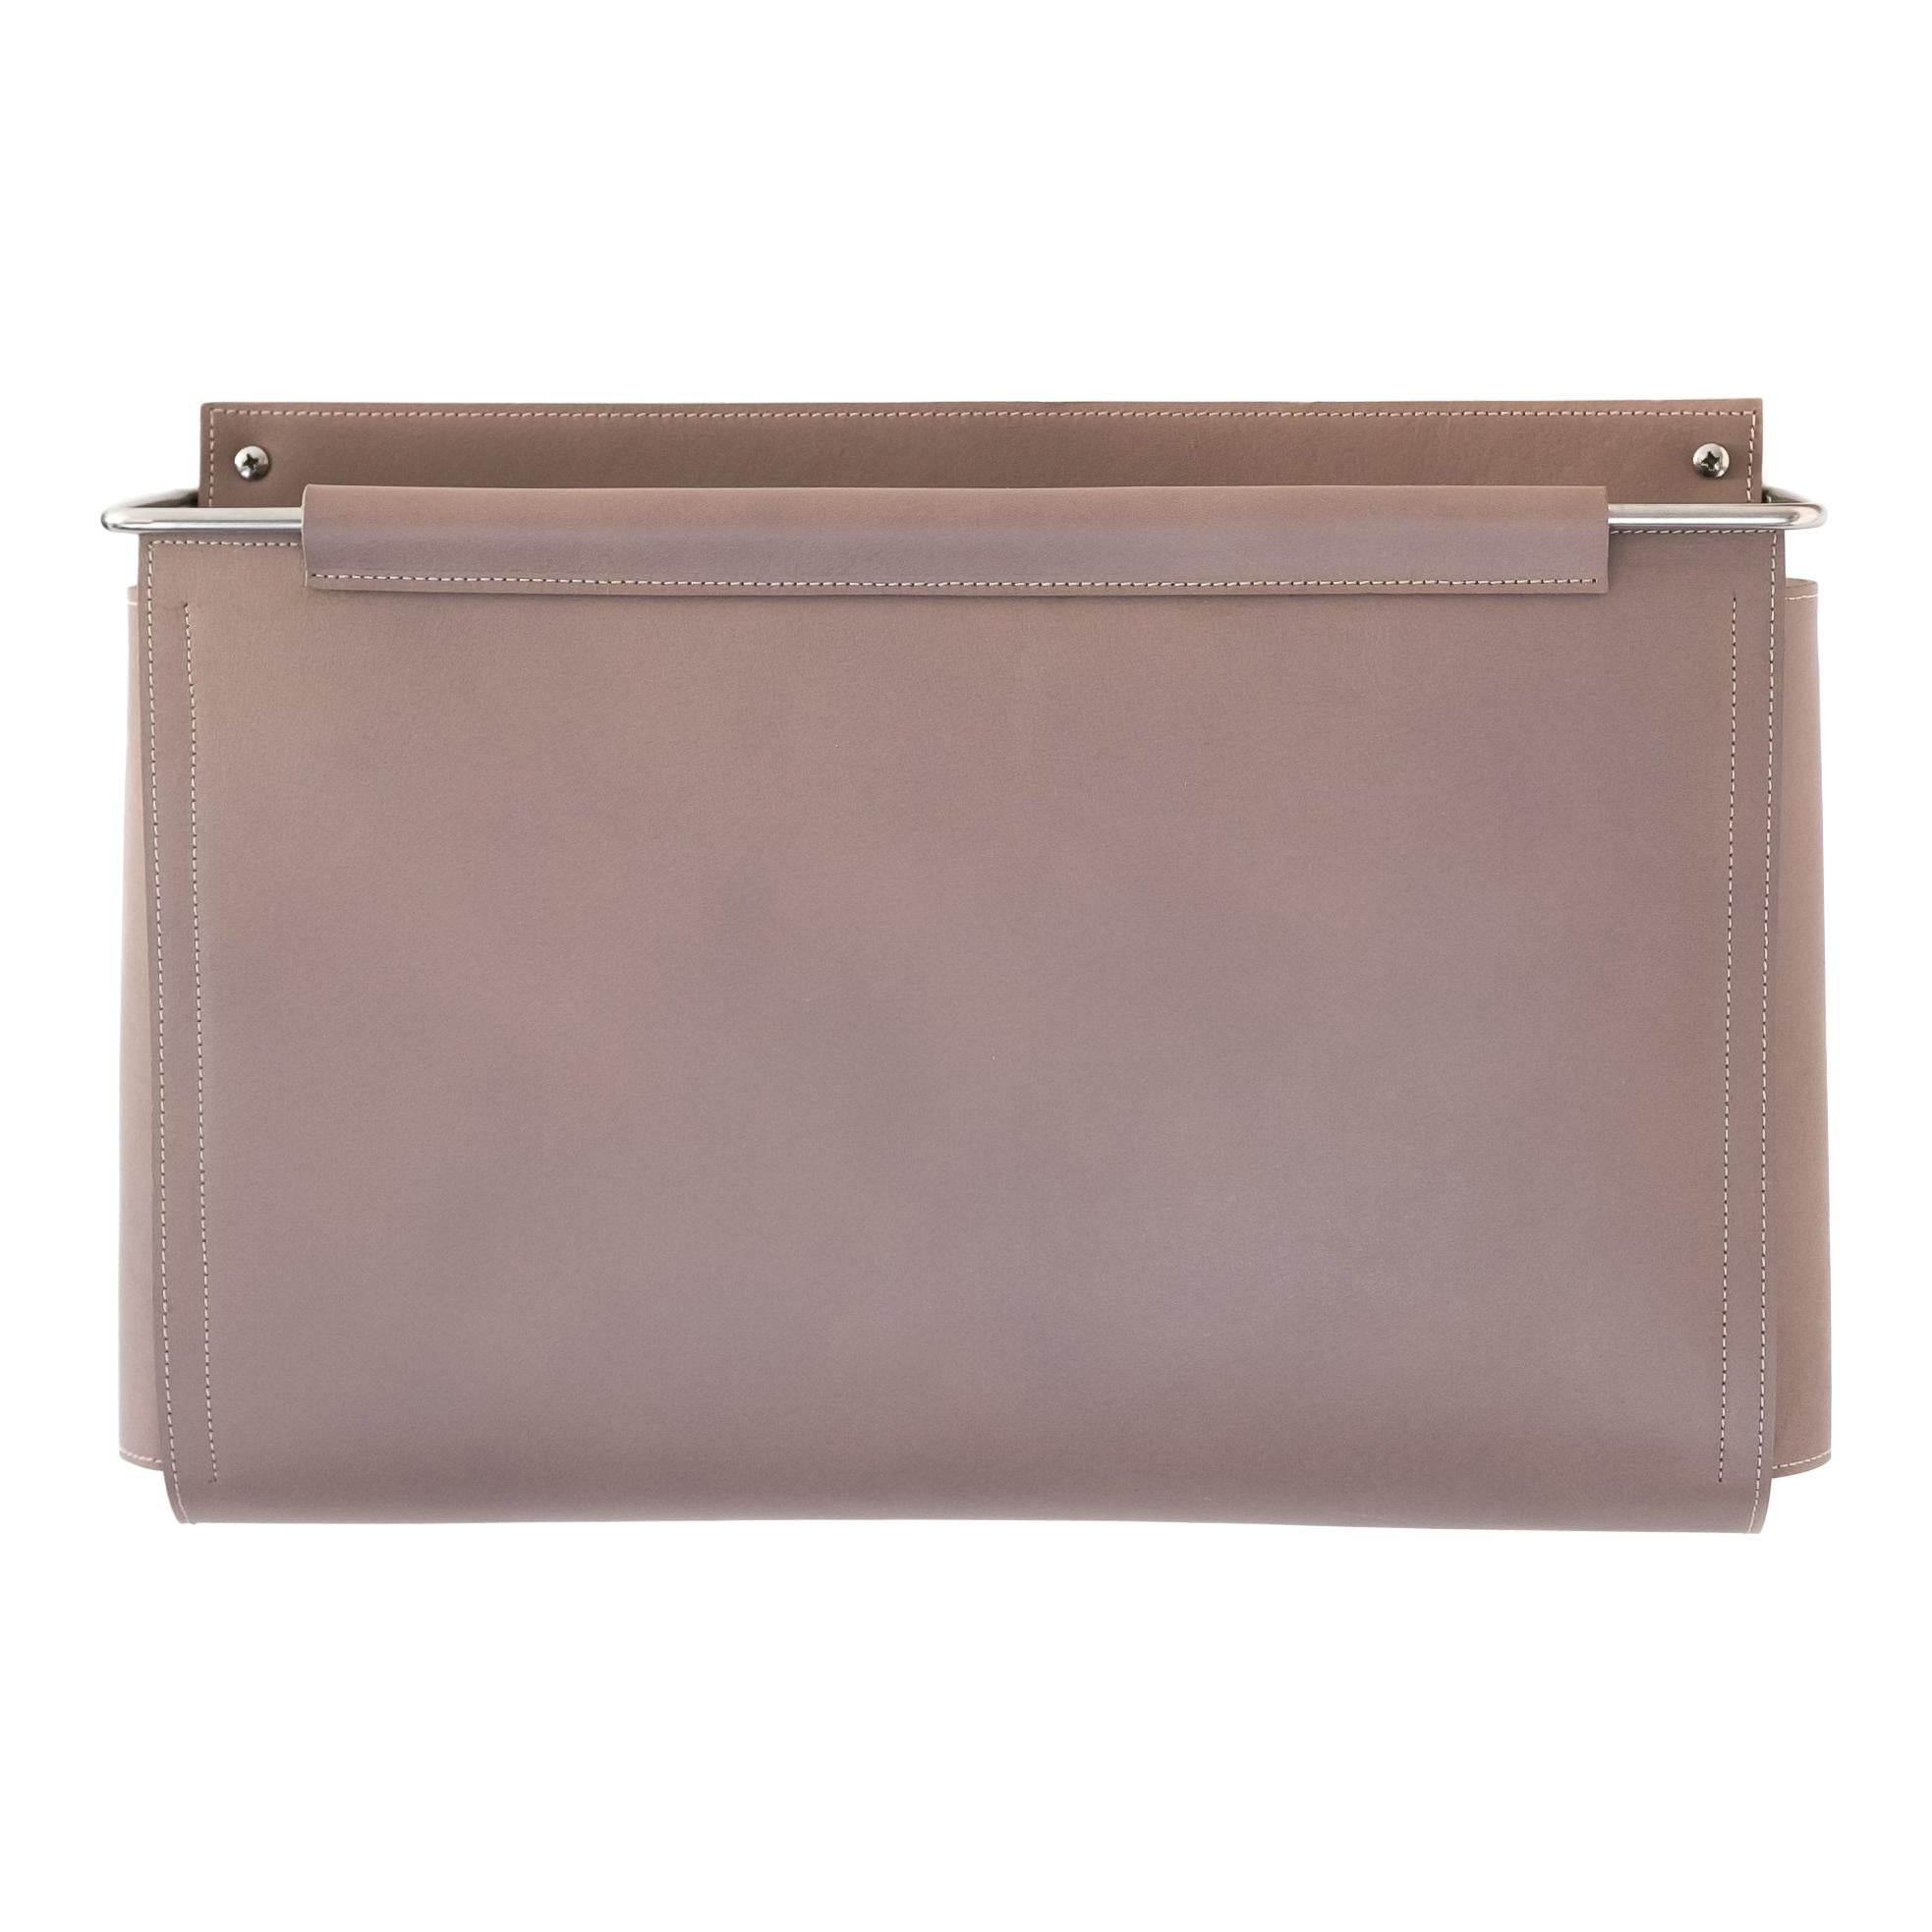 Wall Pocket 16"Lx3"Dx10"H in Taupe Leather and Stainless Steel by Moses Nadel For Sale